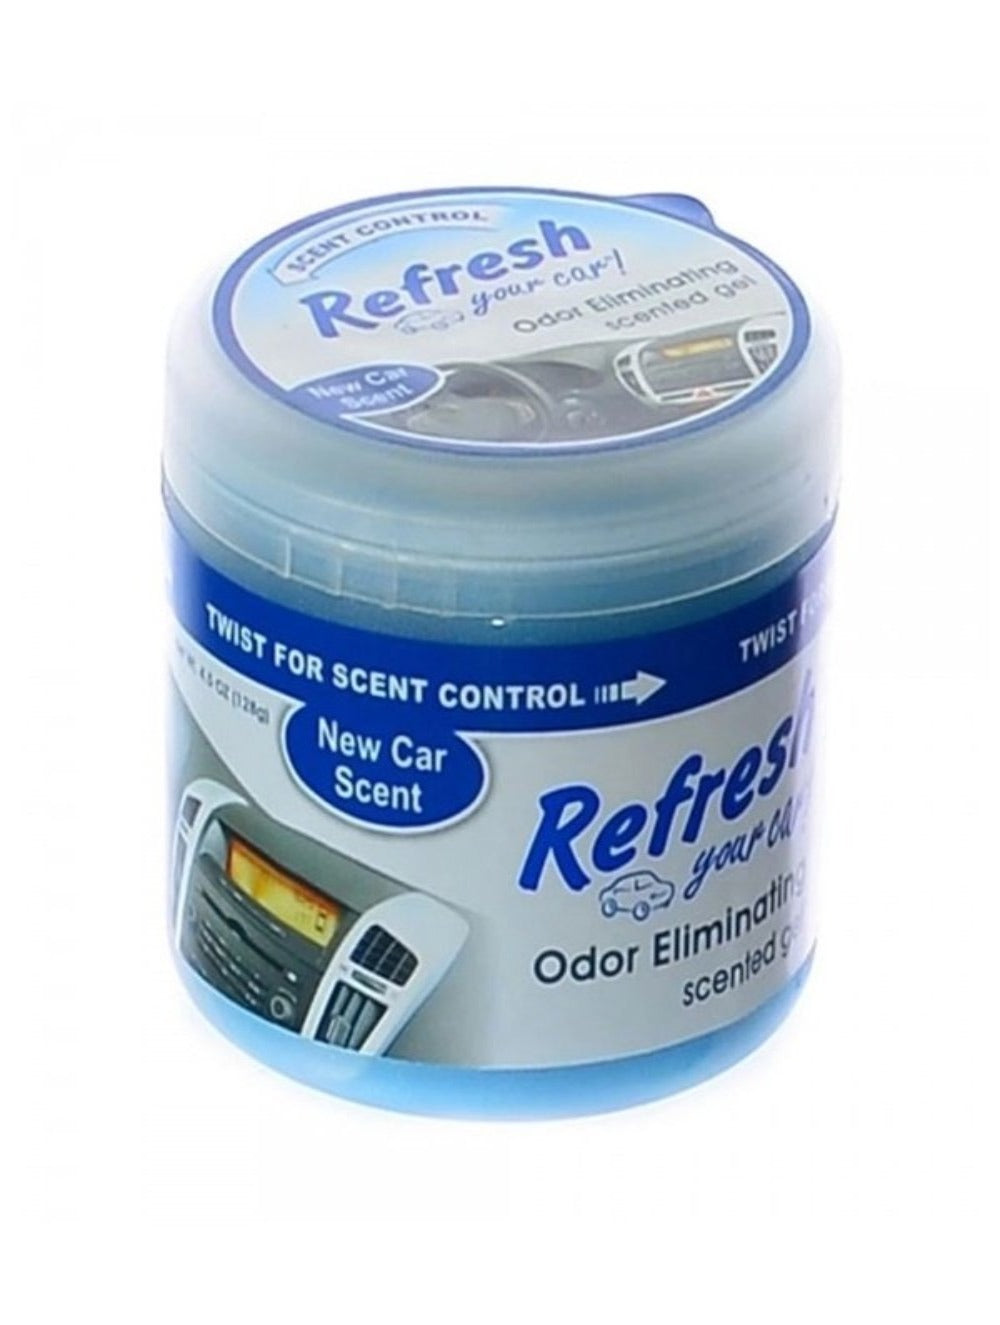 Refresh Gel Can Air Freshener (4.5 Oz, New Car) (Made in USA) Alliance Auto Products